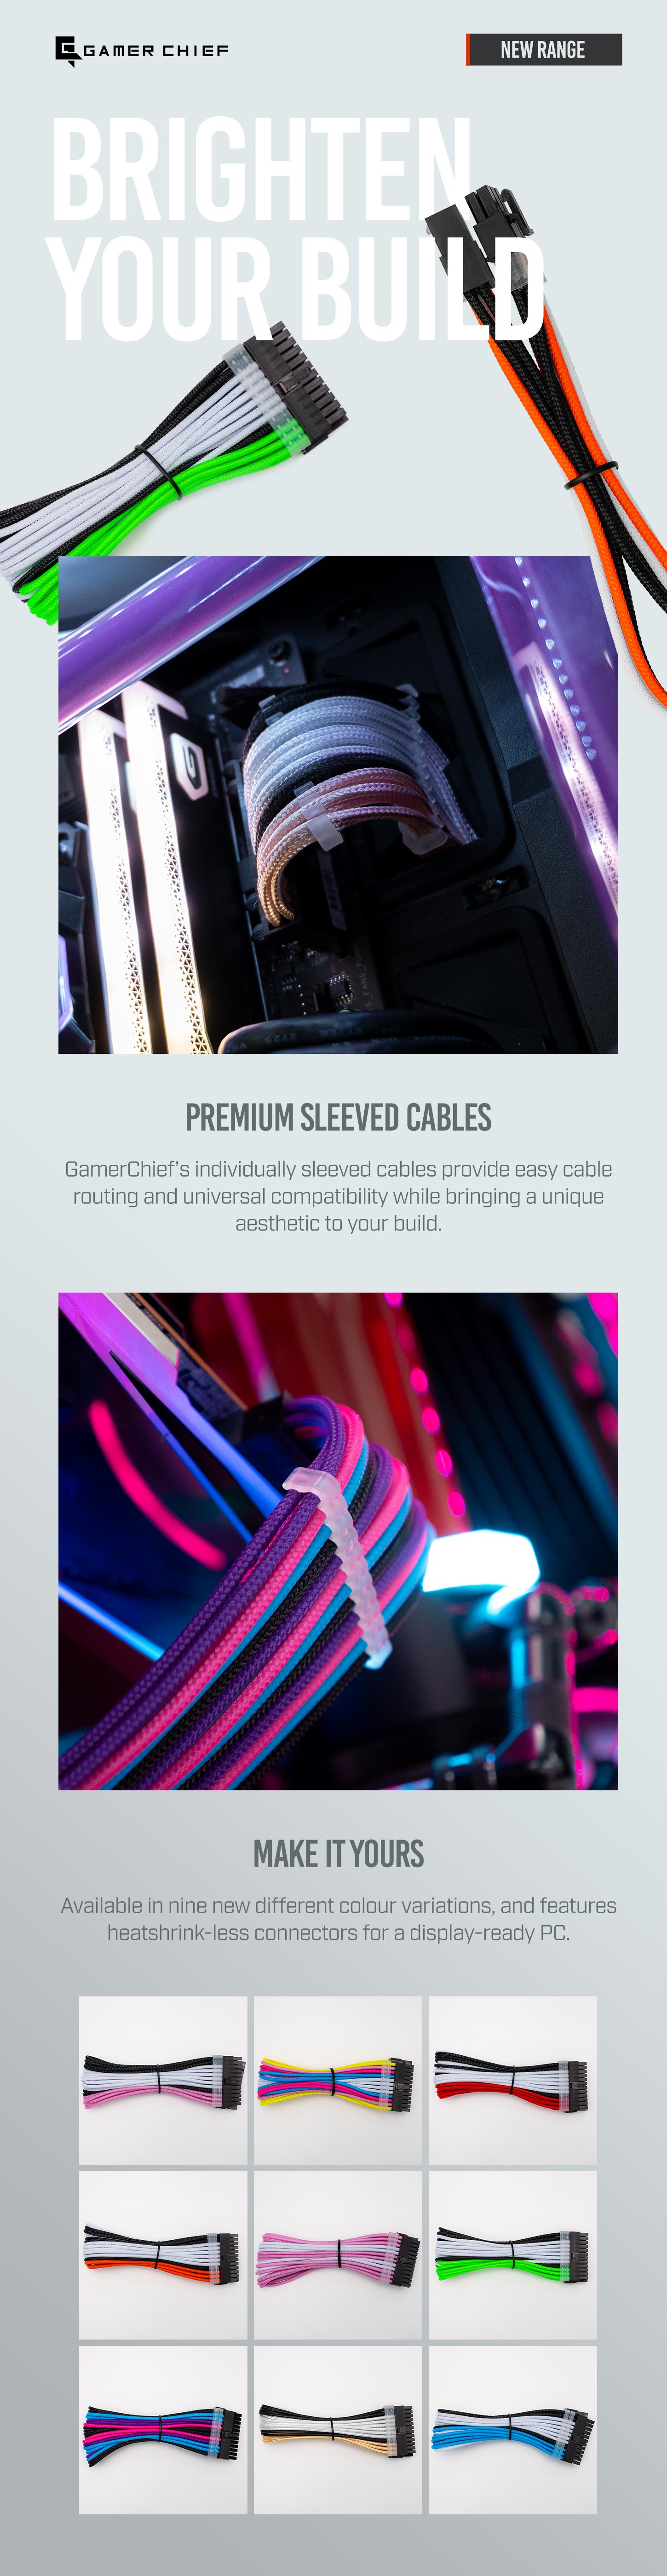 A large marketing image providing additional information about the product GamerChief Elite Series 8-Pin PCIe 30cm Sleeved Extension Cable (Yellow / Light Pink / Pink / Blue / White) - Additional alt info not provided